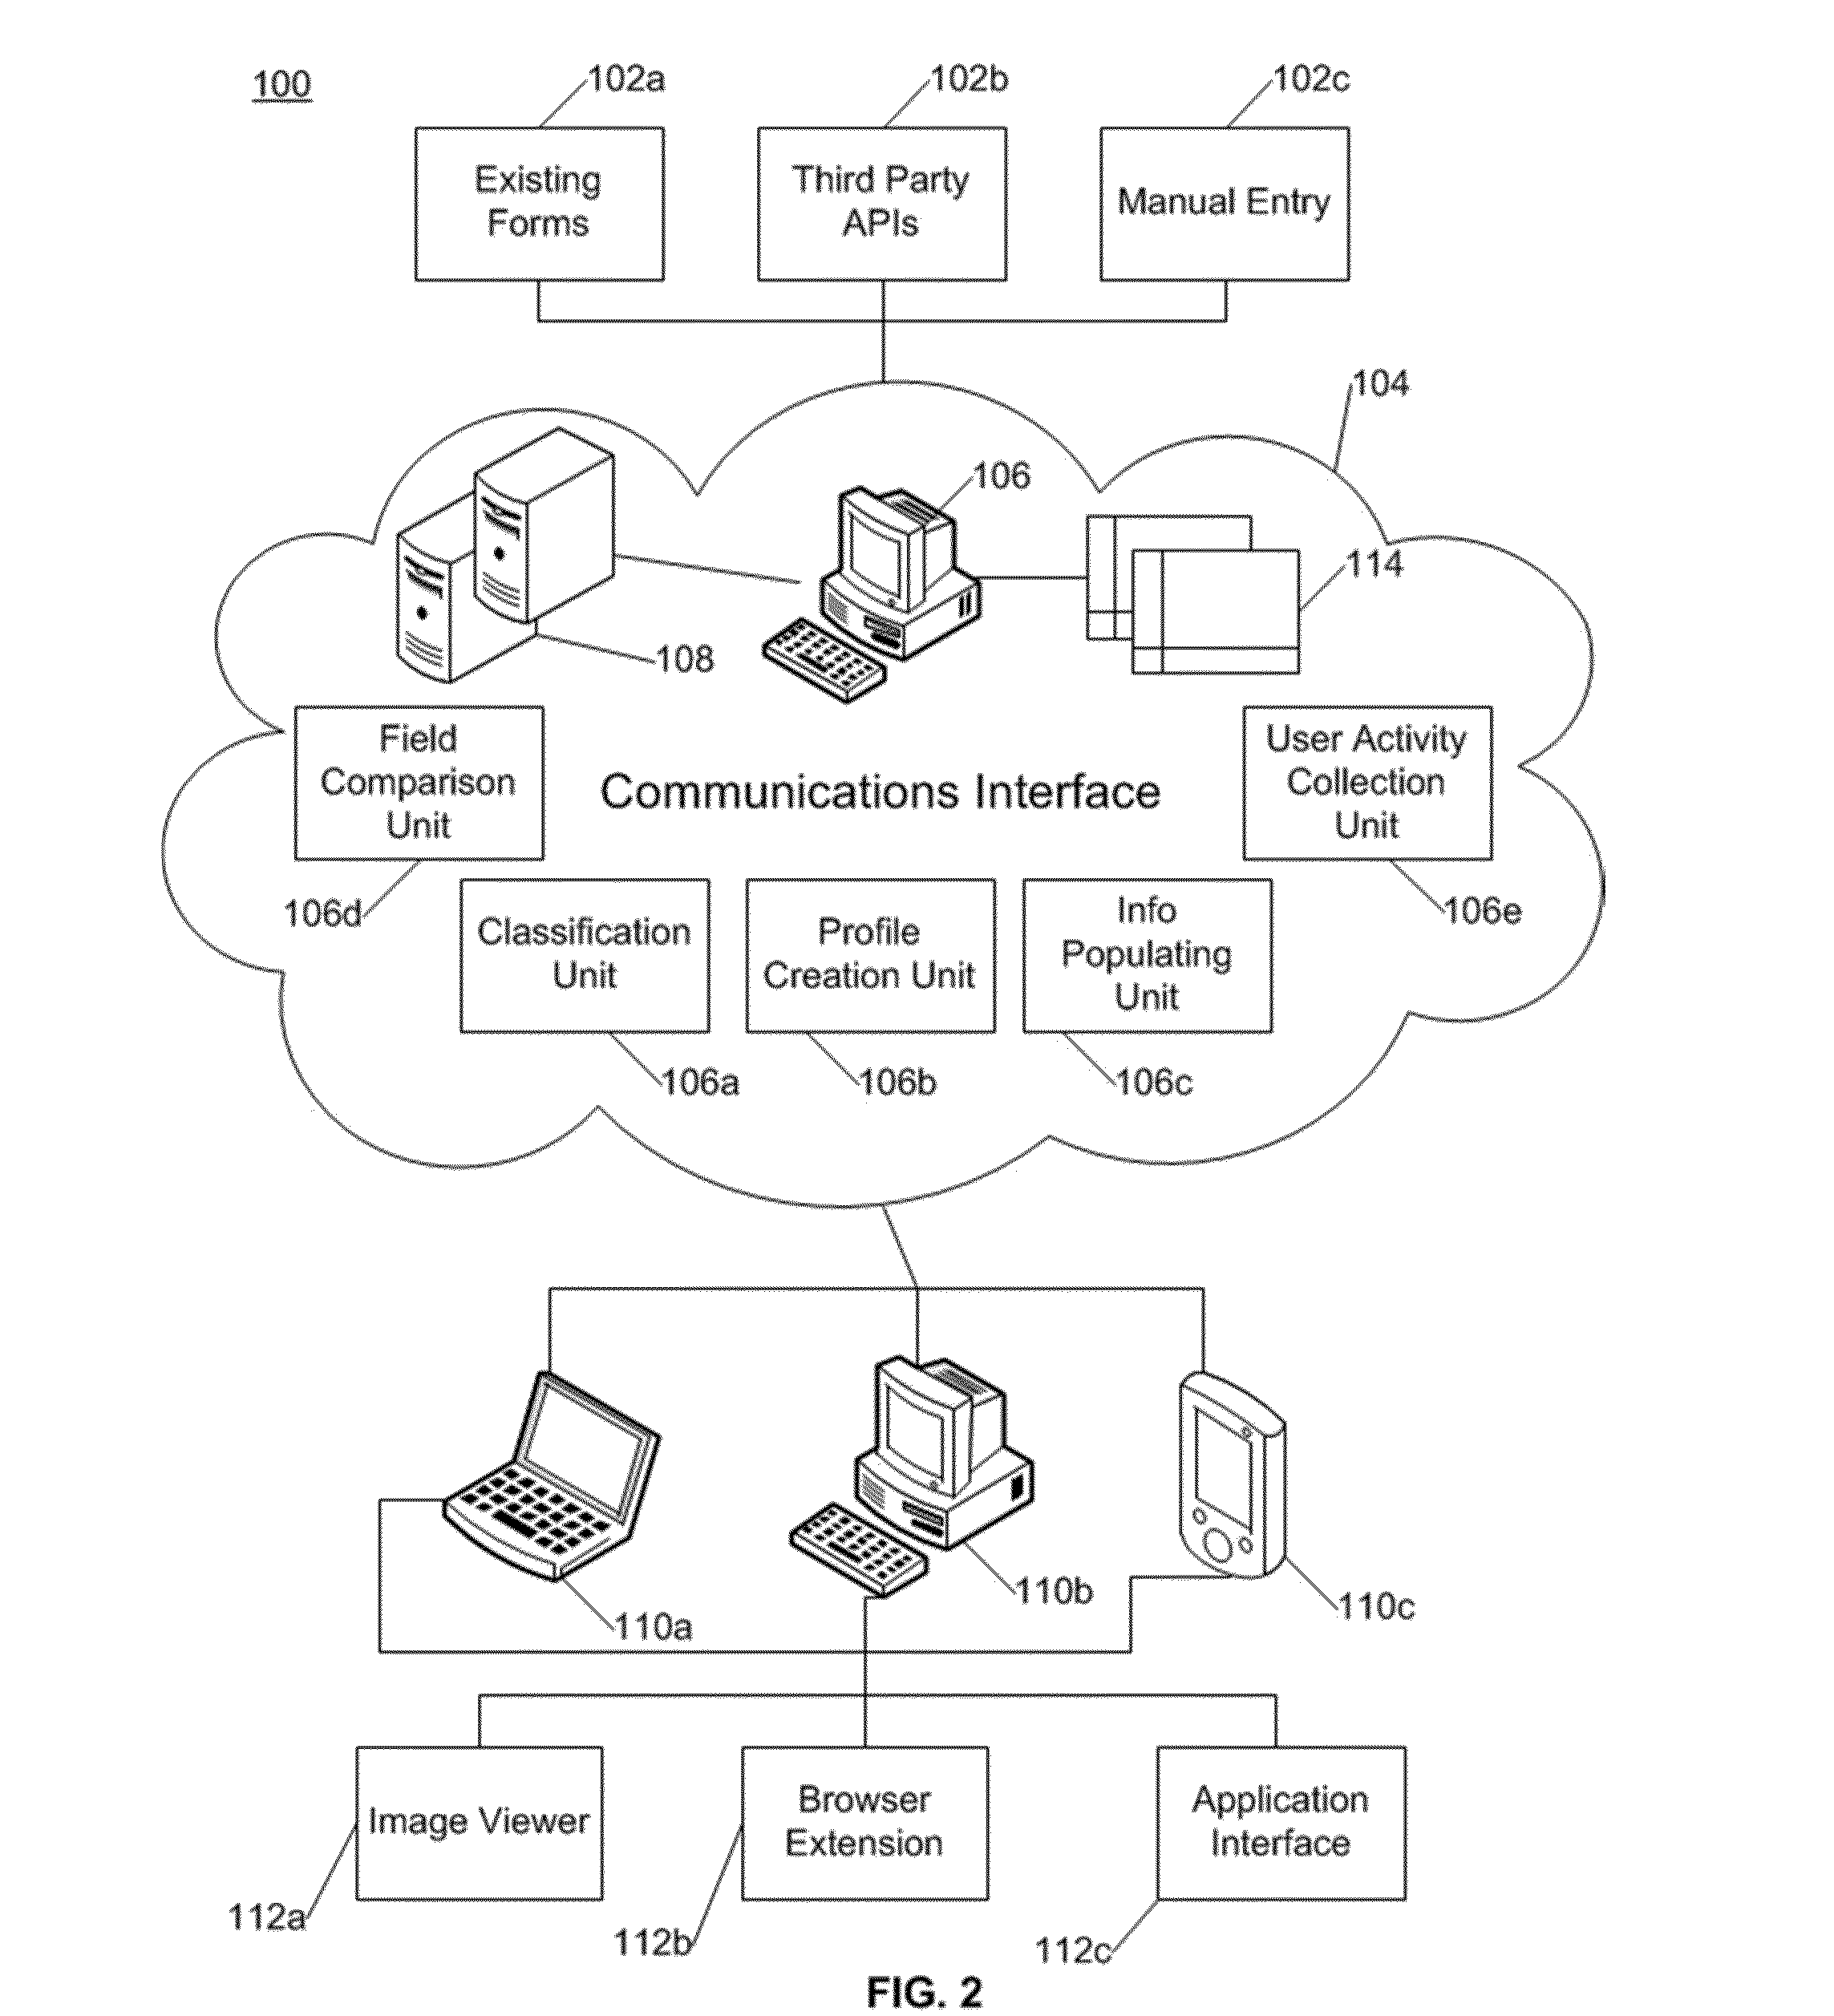 Systems and methods for populating user information on electronic forms